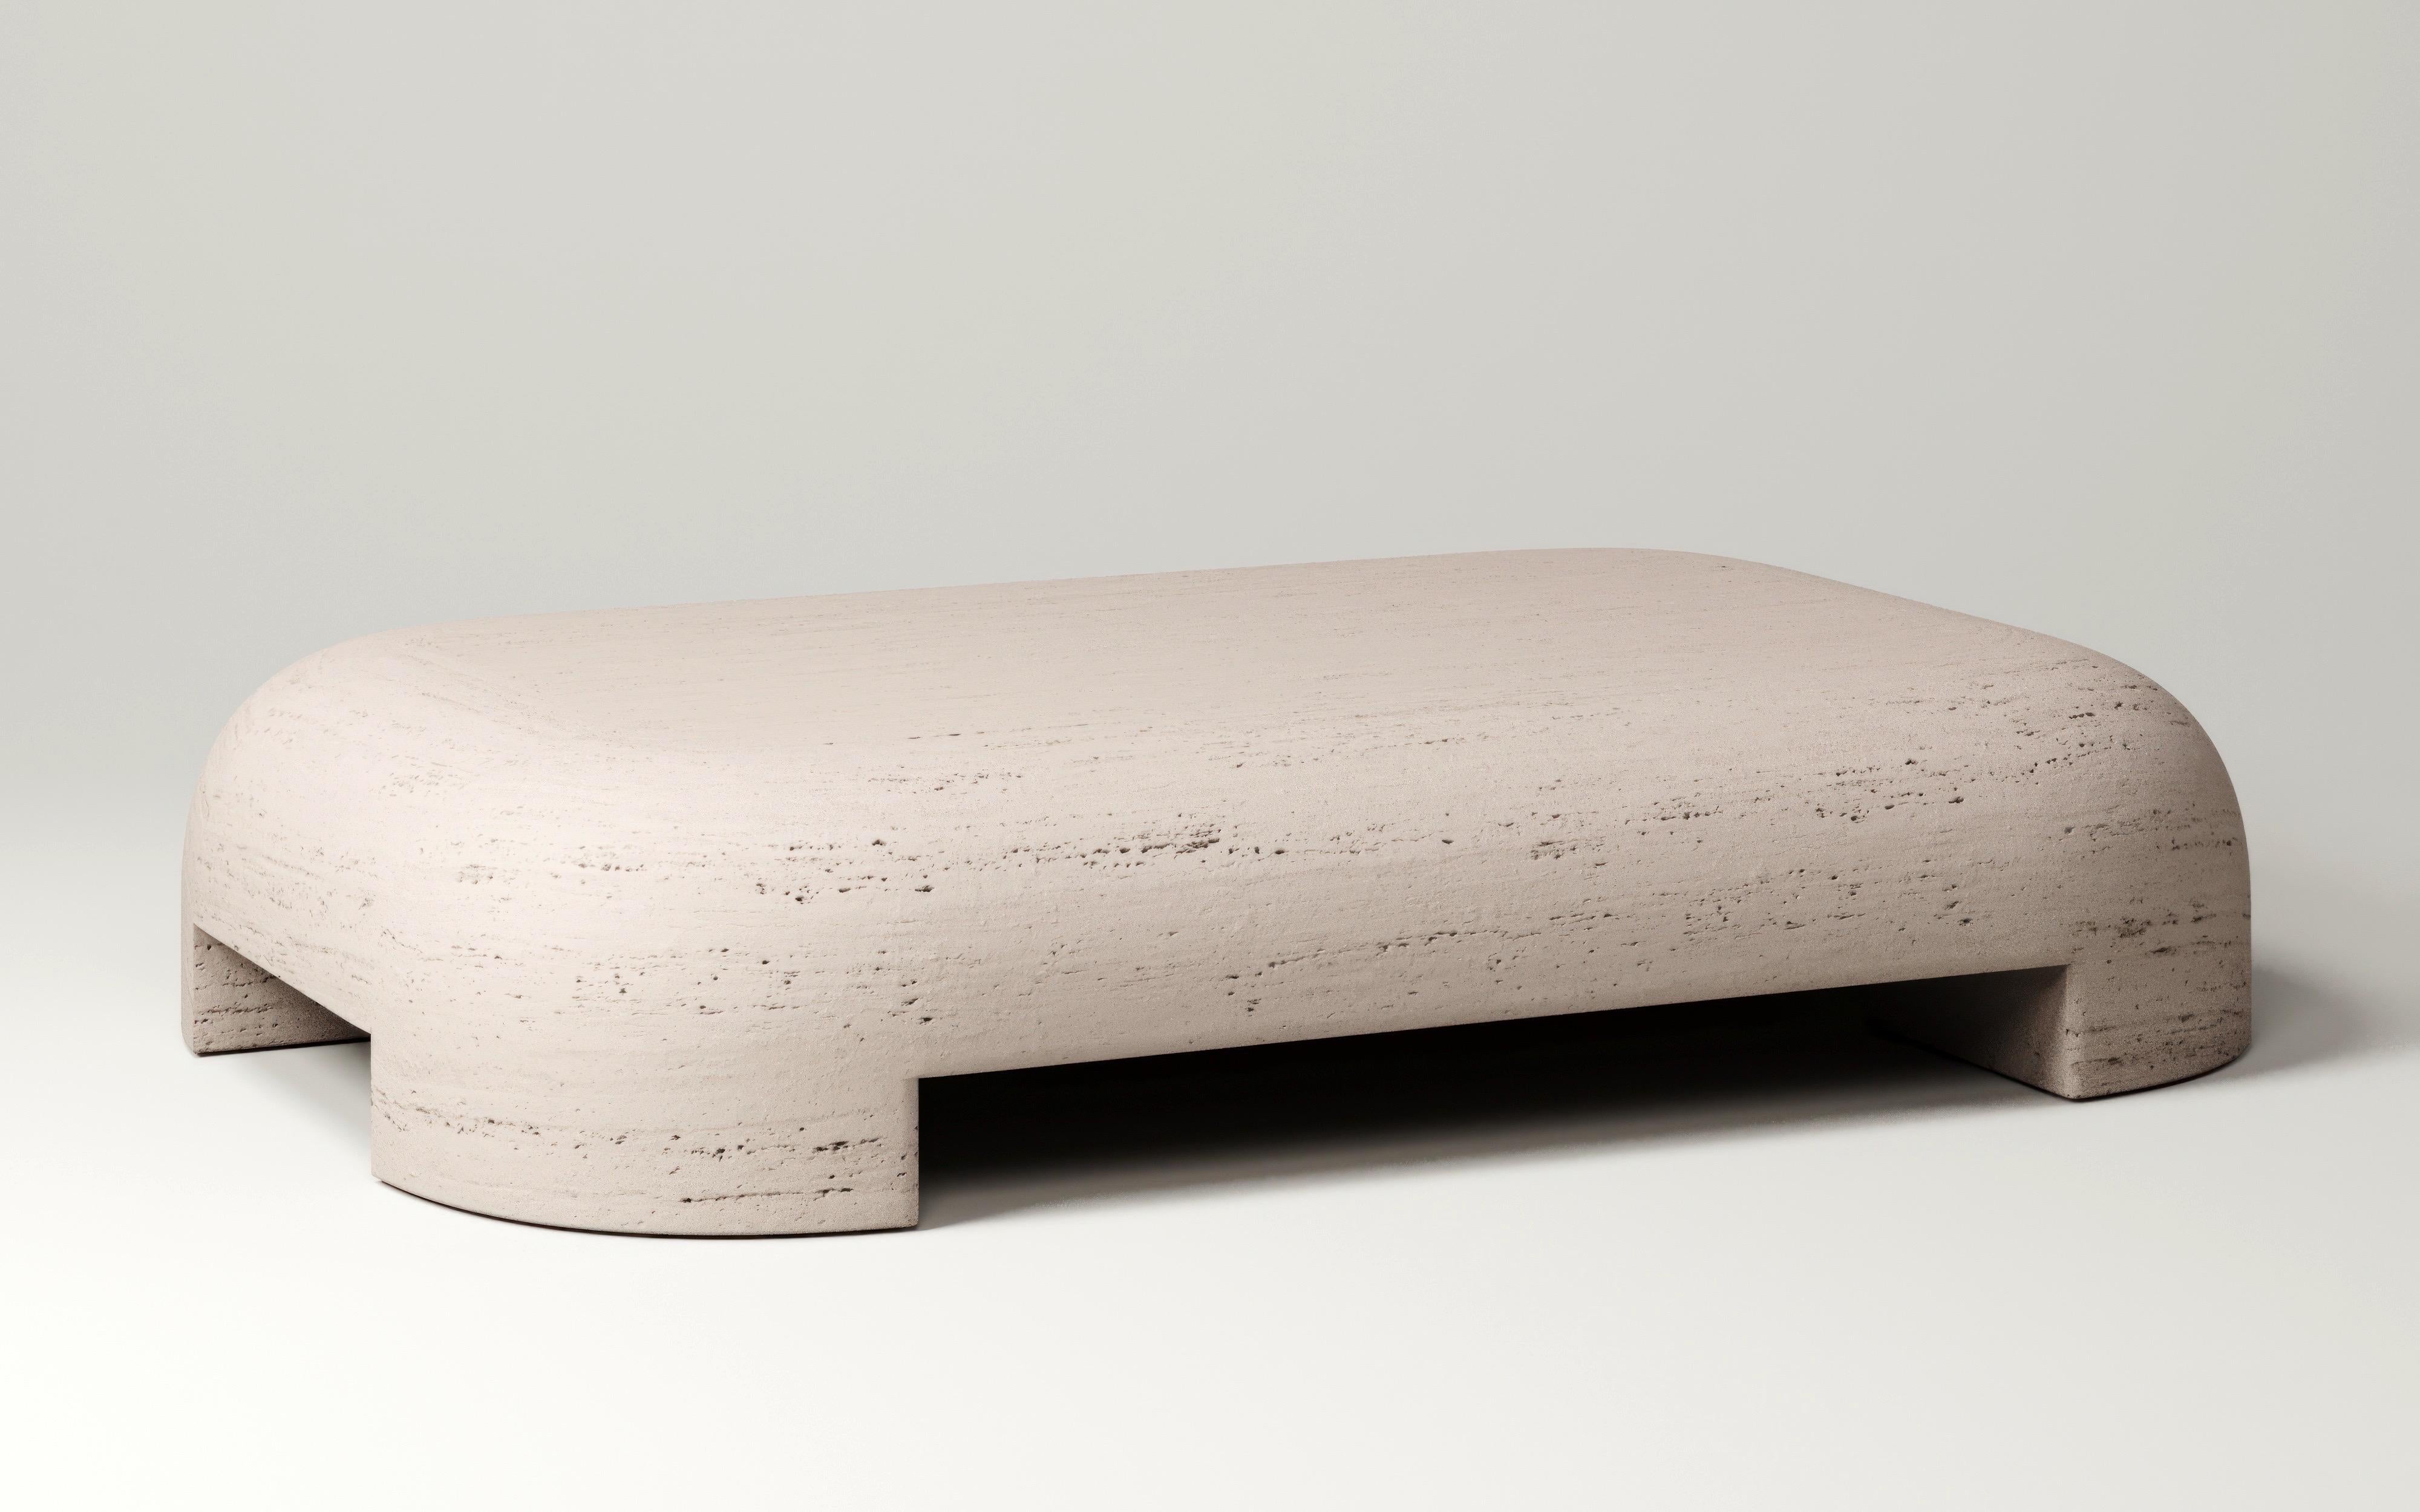 M_012 Travertine Coffee Table by Monolith Studio
Signed and Numbered.
Dimensions: D 150 x W 100 x H 30 cm. 
Materials: Travertine. 

Available in travertine, lava rock, walnut and white oak (on request). Please contact us. 

Monolith, founded in